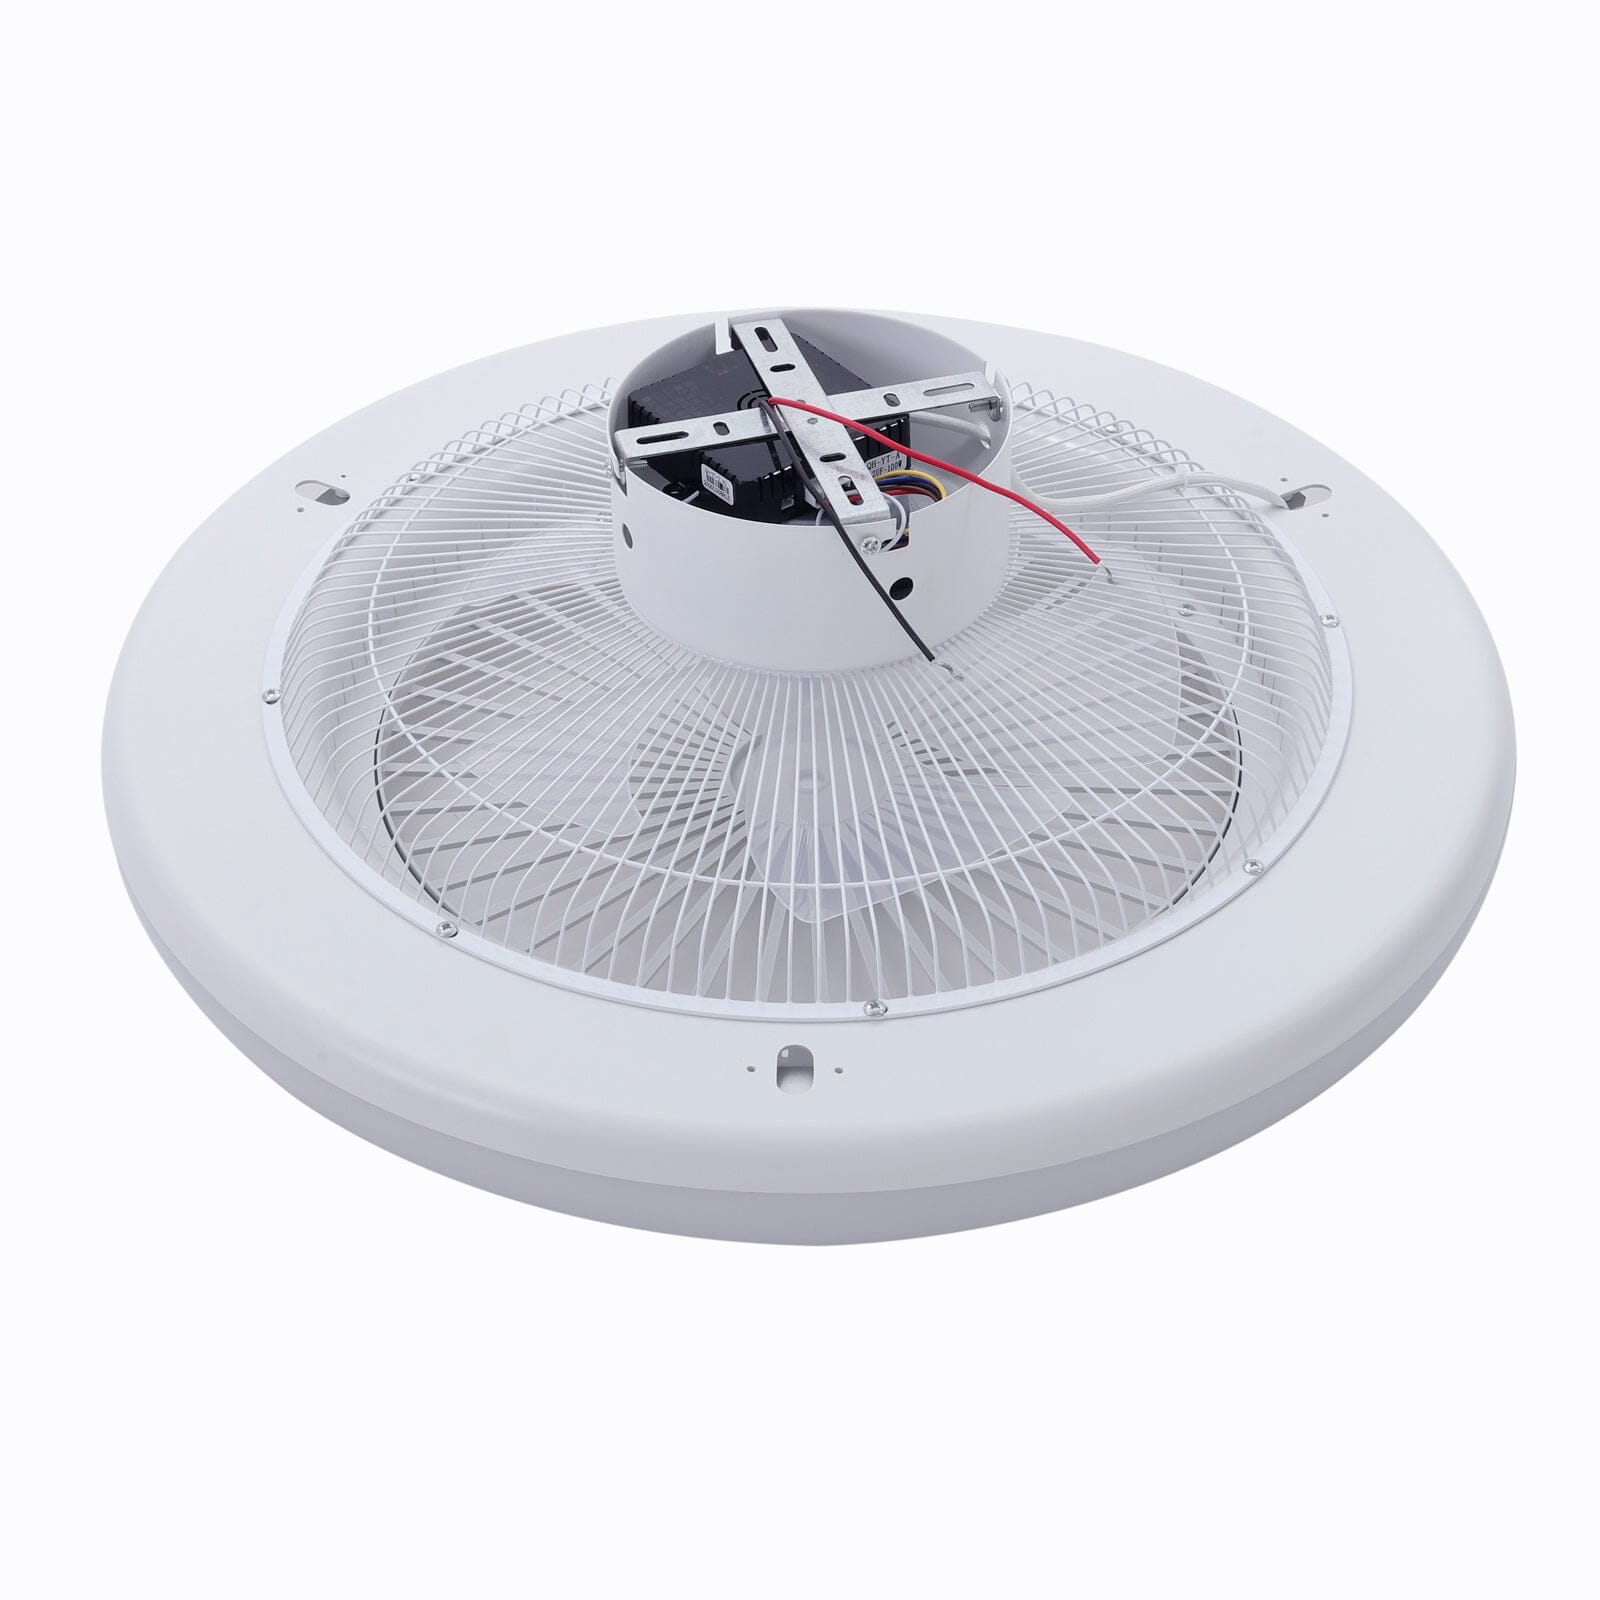 Dia. 55cm Ceiling Fan w/75W LED Light Adjustable 3-Wind Speed Remote Control Ceiling Fans Living and Home 